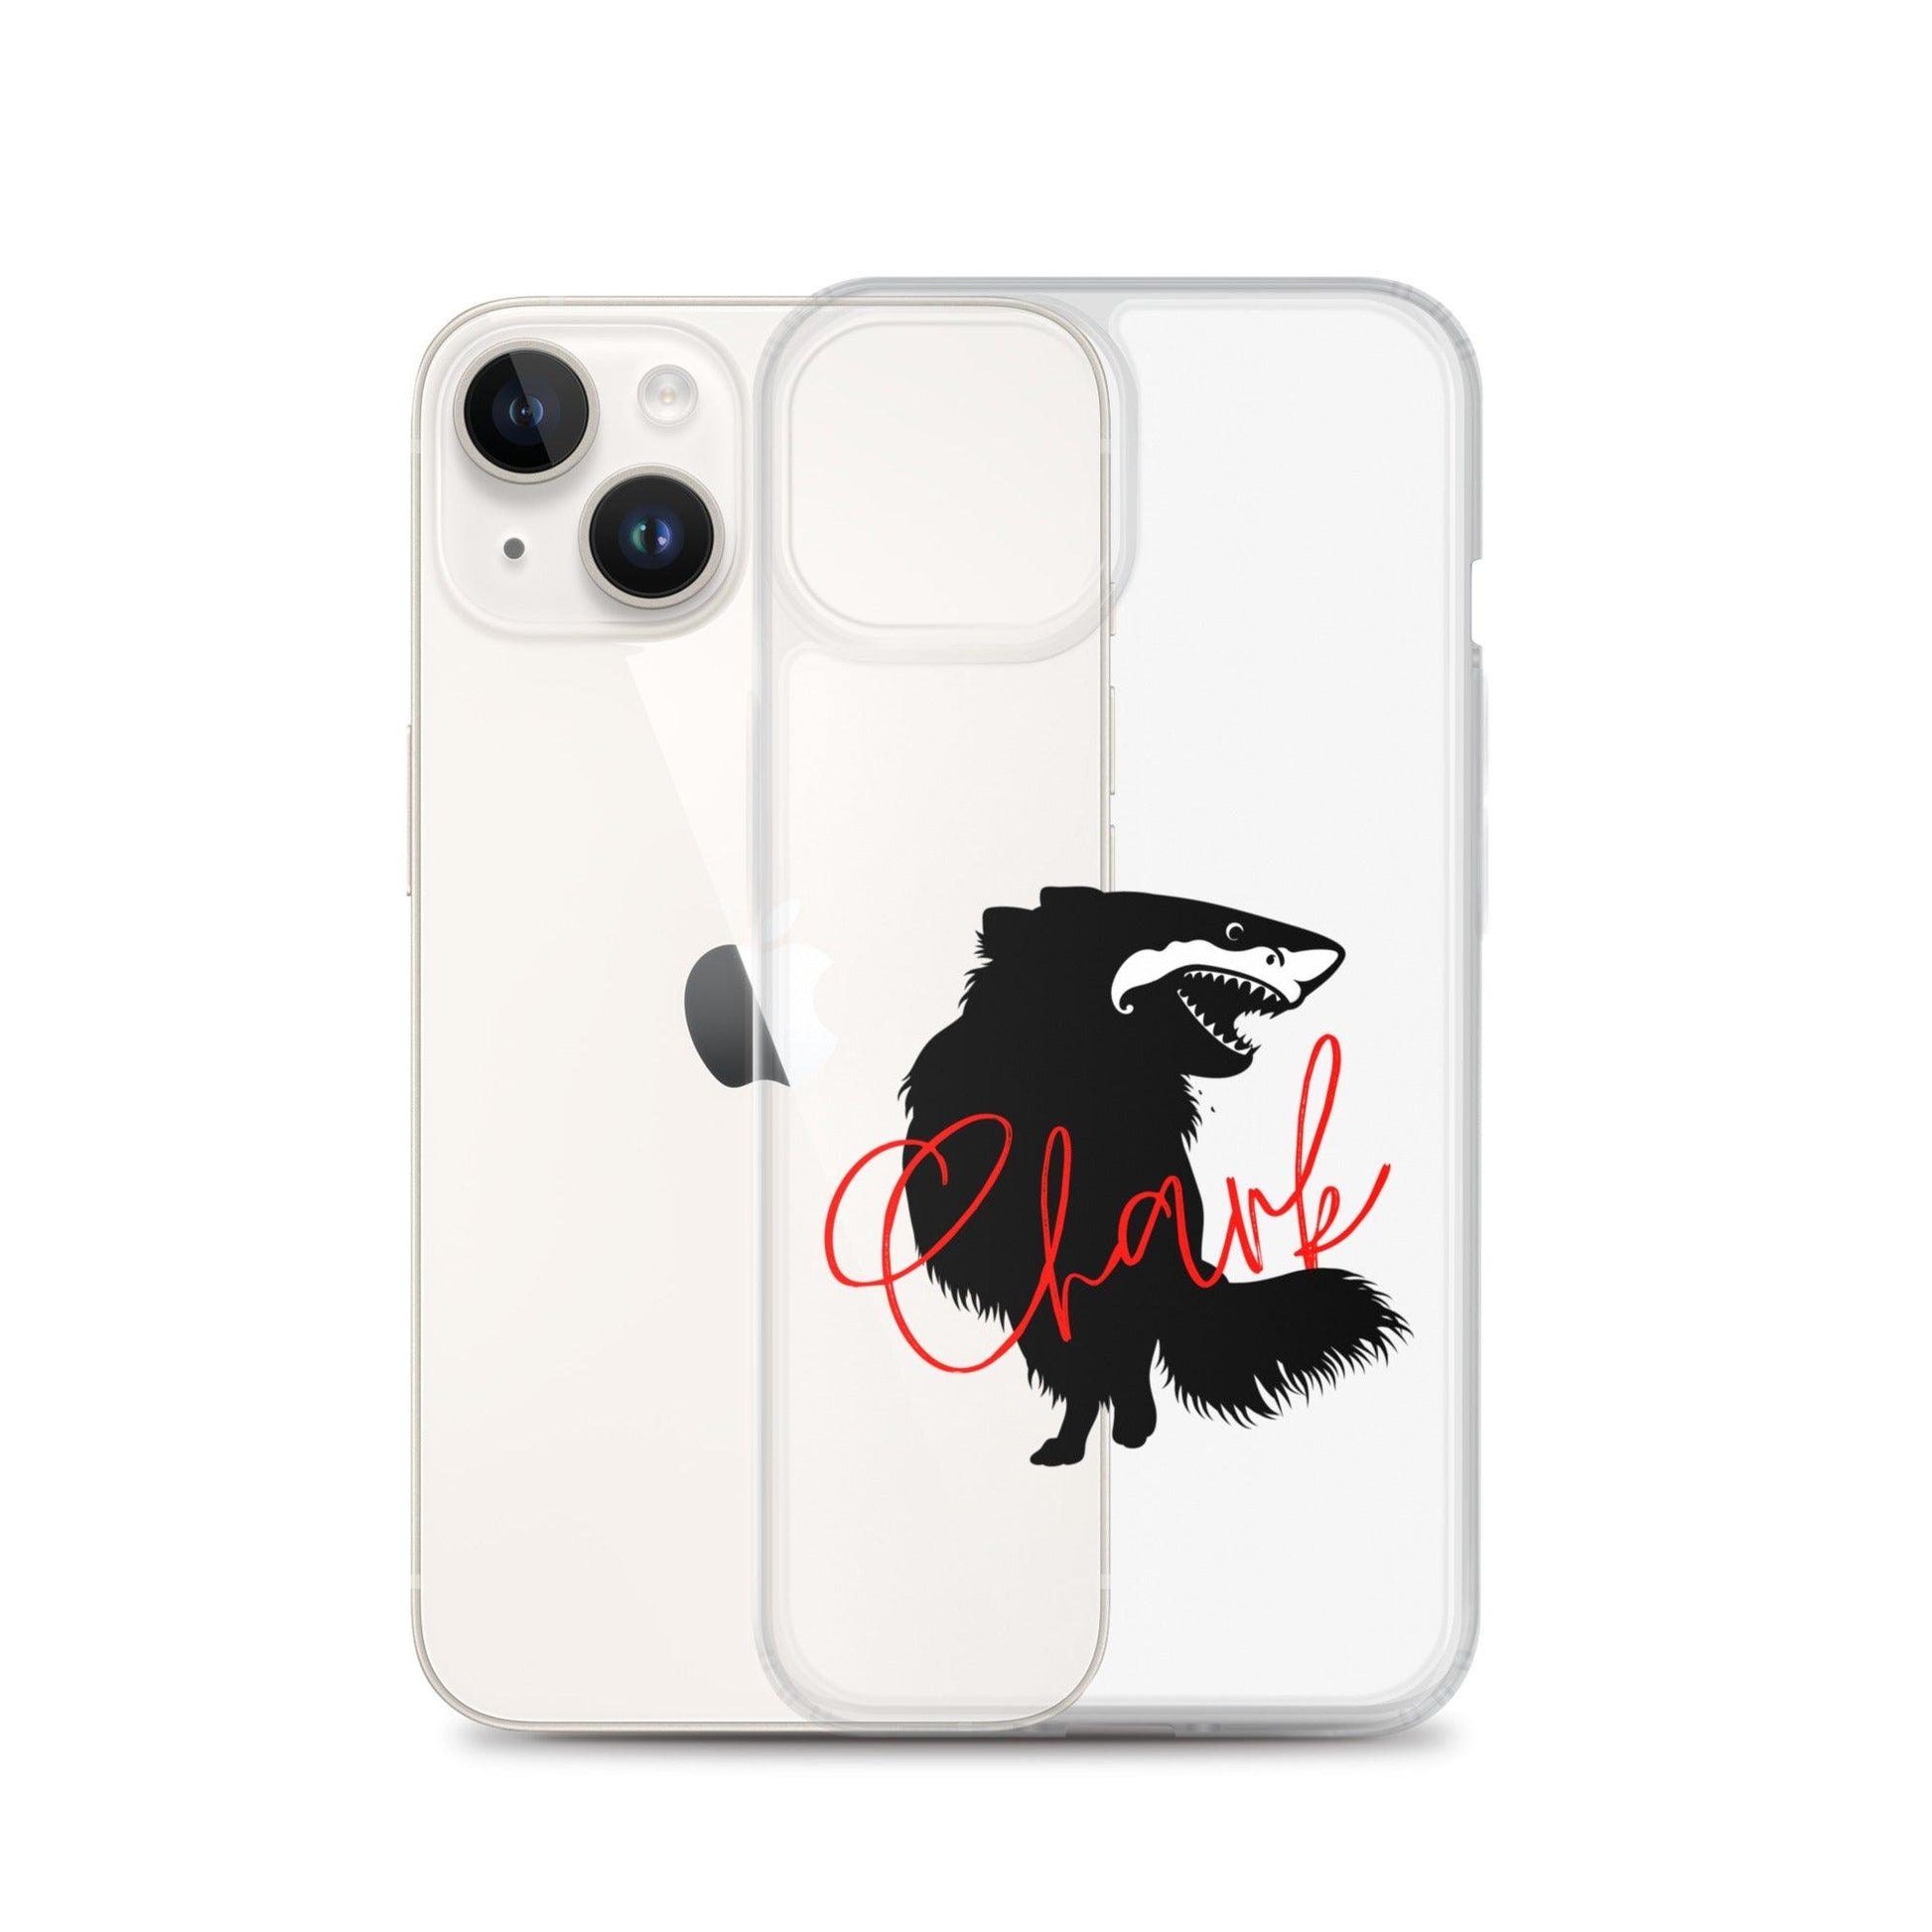 Chihuahua + Shark = Chark Clear iPhone case with the black silhouette of a longhaired chihuahua with the face of a great white shark - mouth open to show off jaws lined with lots of sharp white teeth. The word "Chark" is artfully placed in red cursive font over the image. For trendy chi lovers. iPhone 14 case.